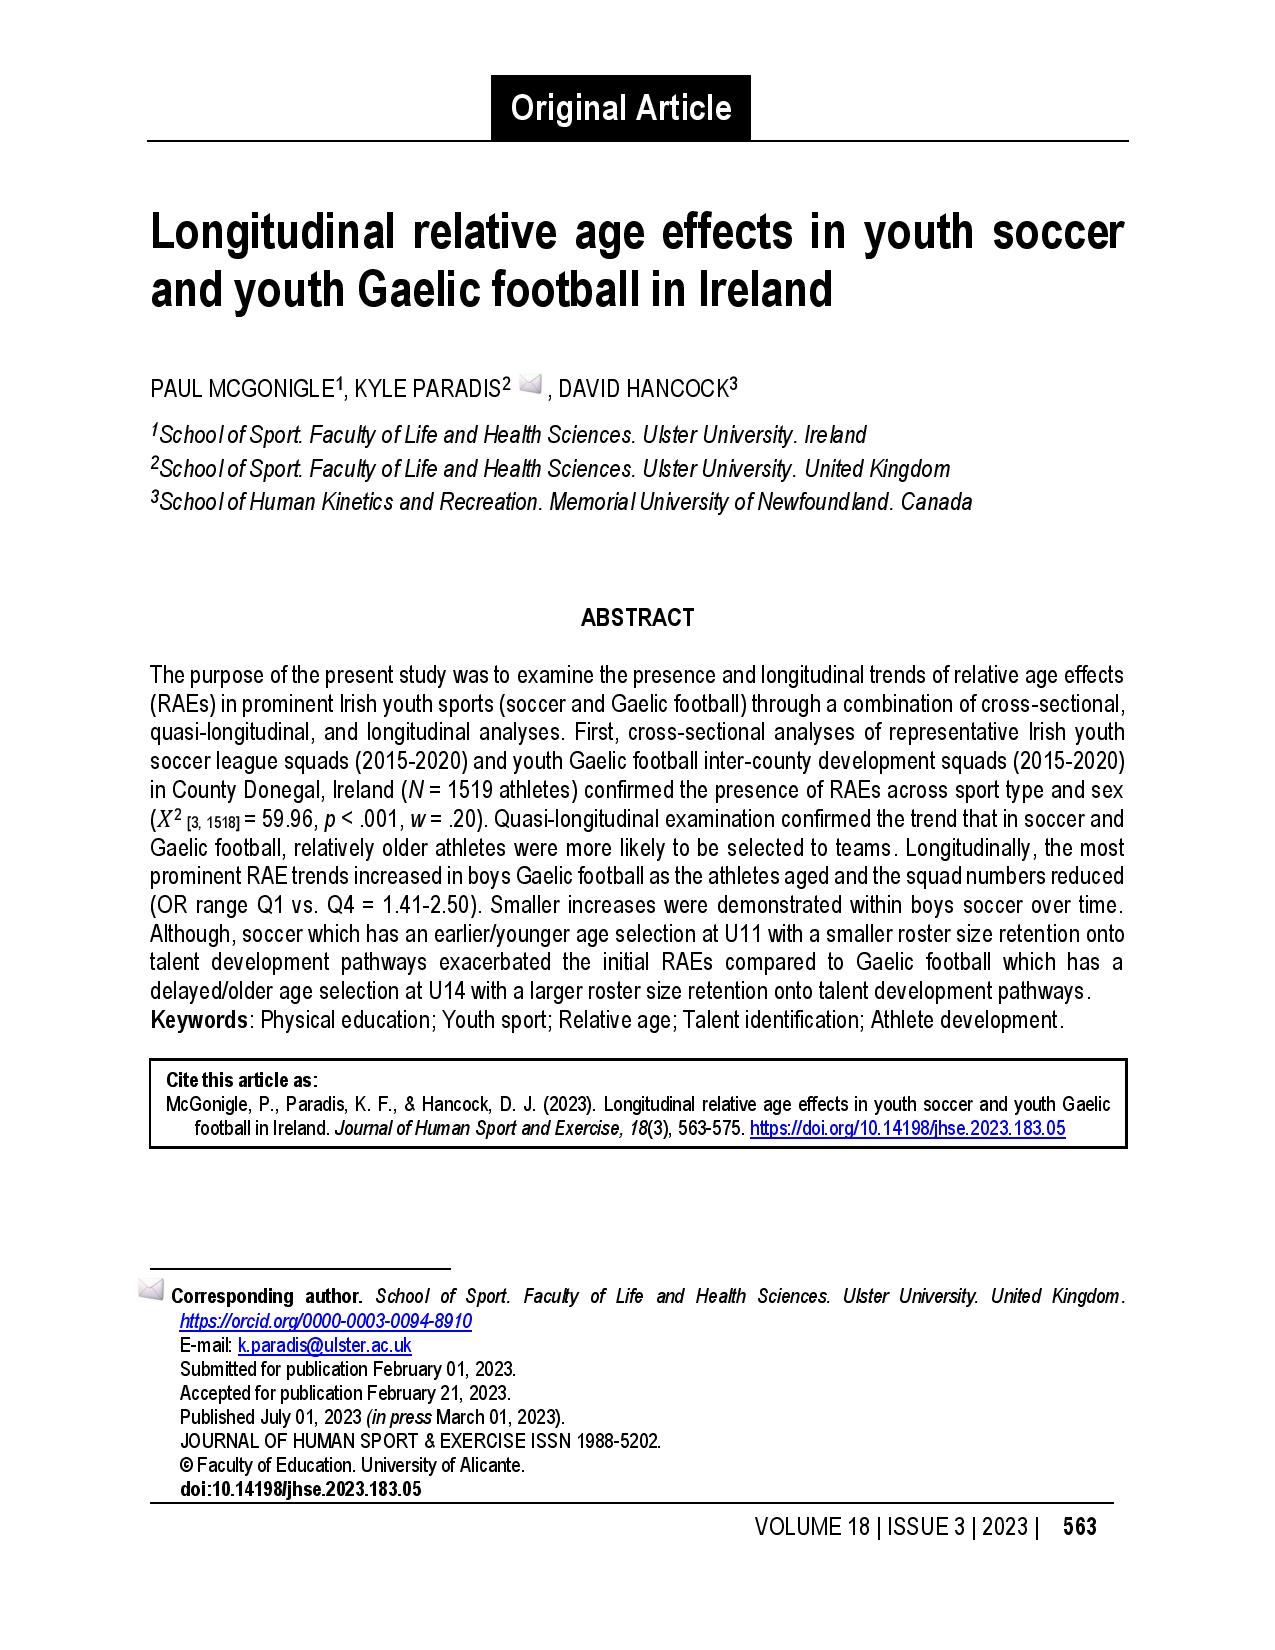 Longitudinal relative age effects in youth soccer and youth Gaelic football in Ireland